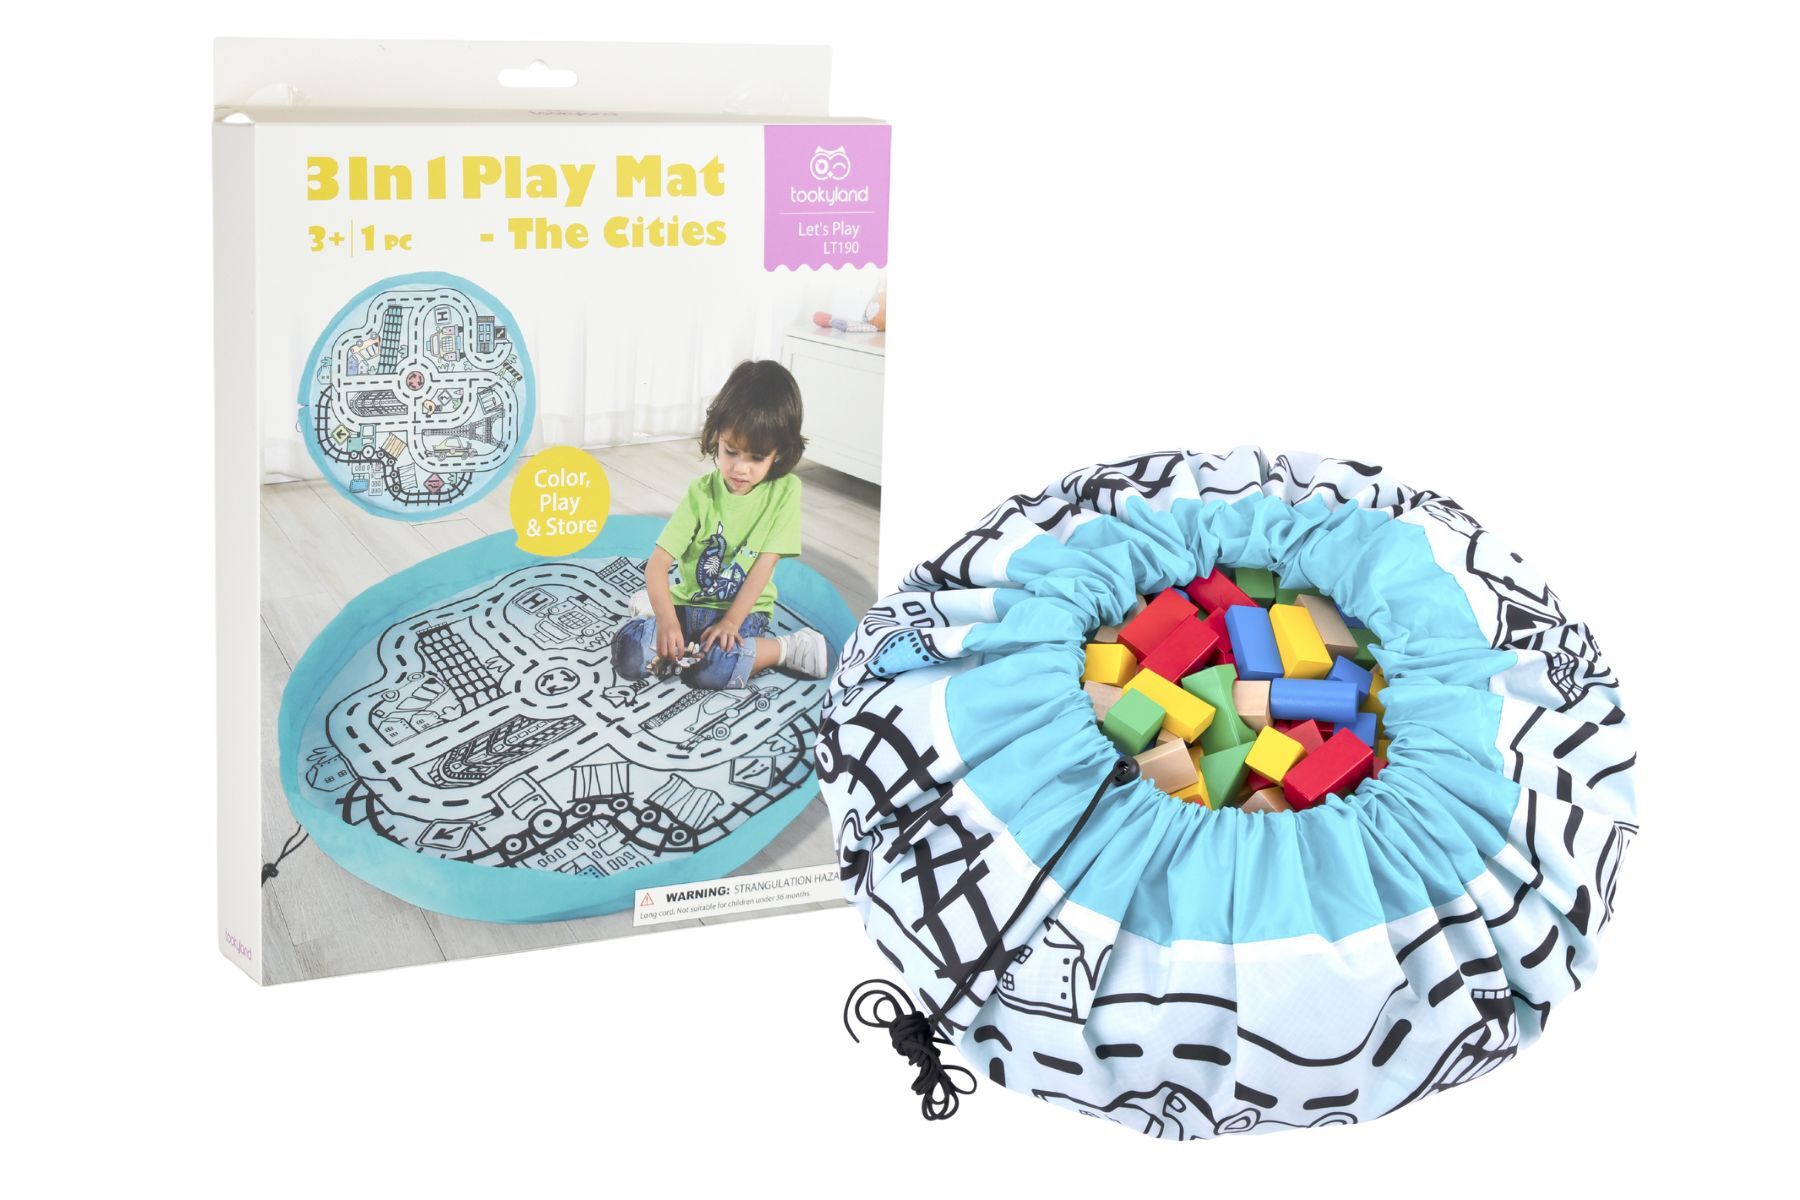 Children's cityscape play mat ready for sensory play